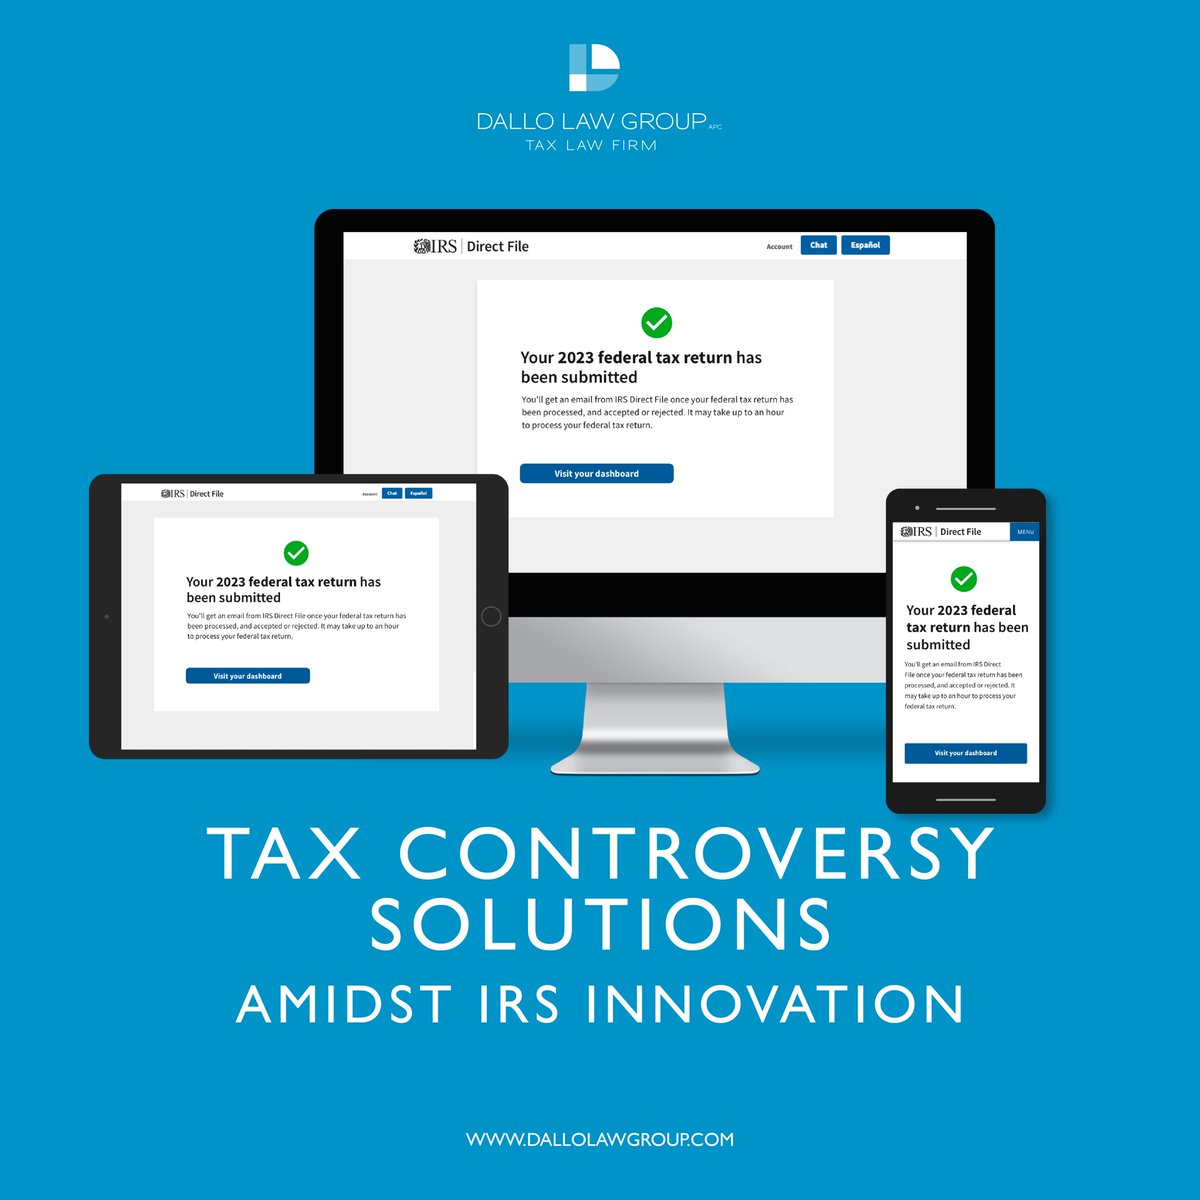 'Discover peace of mind with Dallo Law Group - your trusted experts in tax solutions amidst IRS innovation. #TaxRelief #IRS #PeaceOfMind